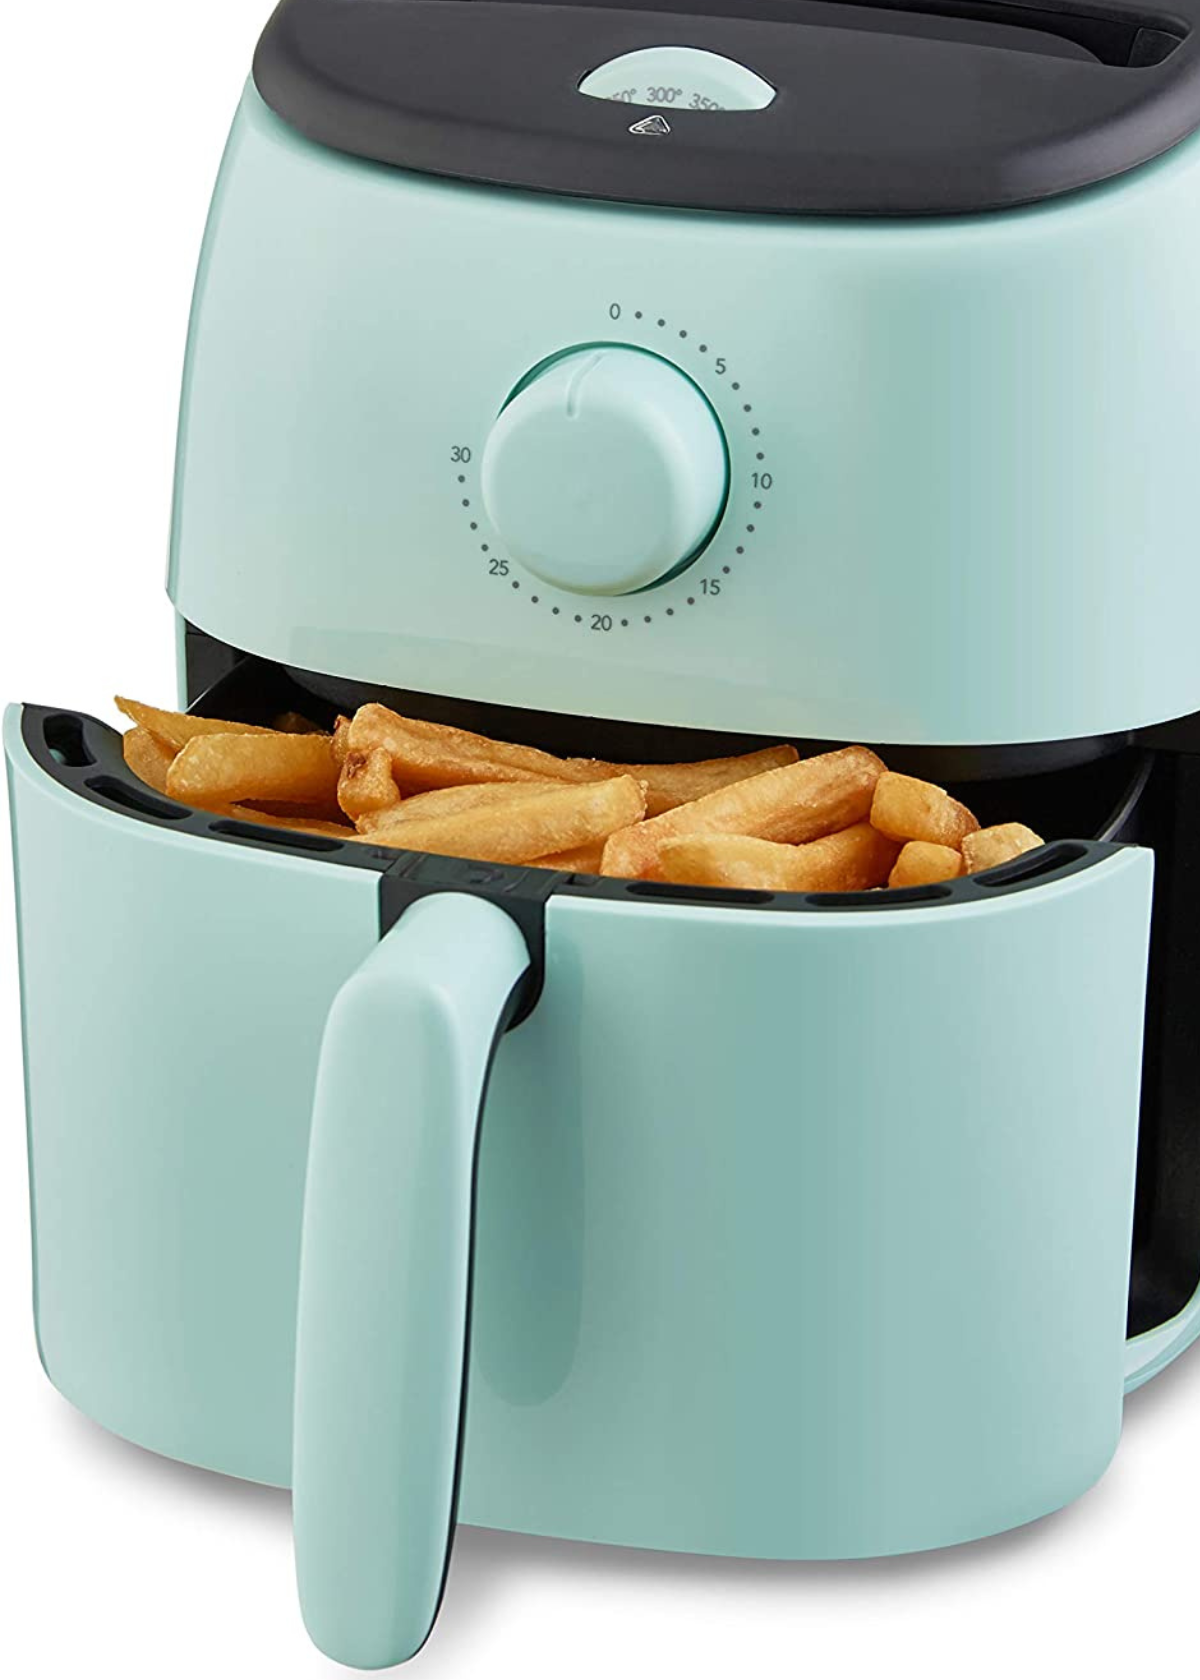 Turquoise Air Fryer: Refreshing Look For Your Kitchen